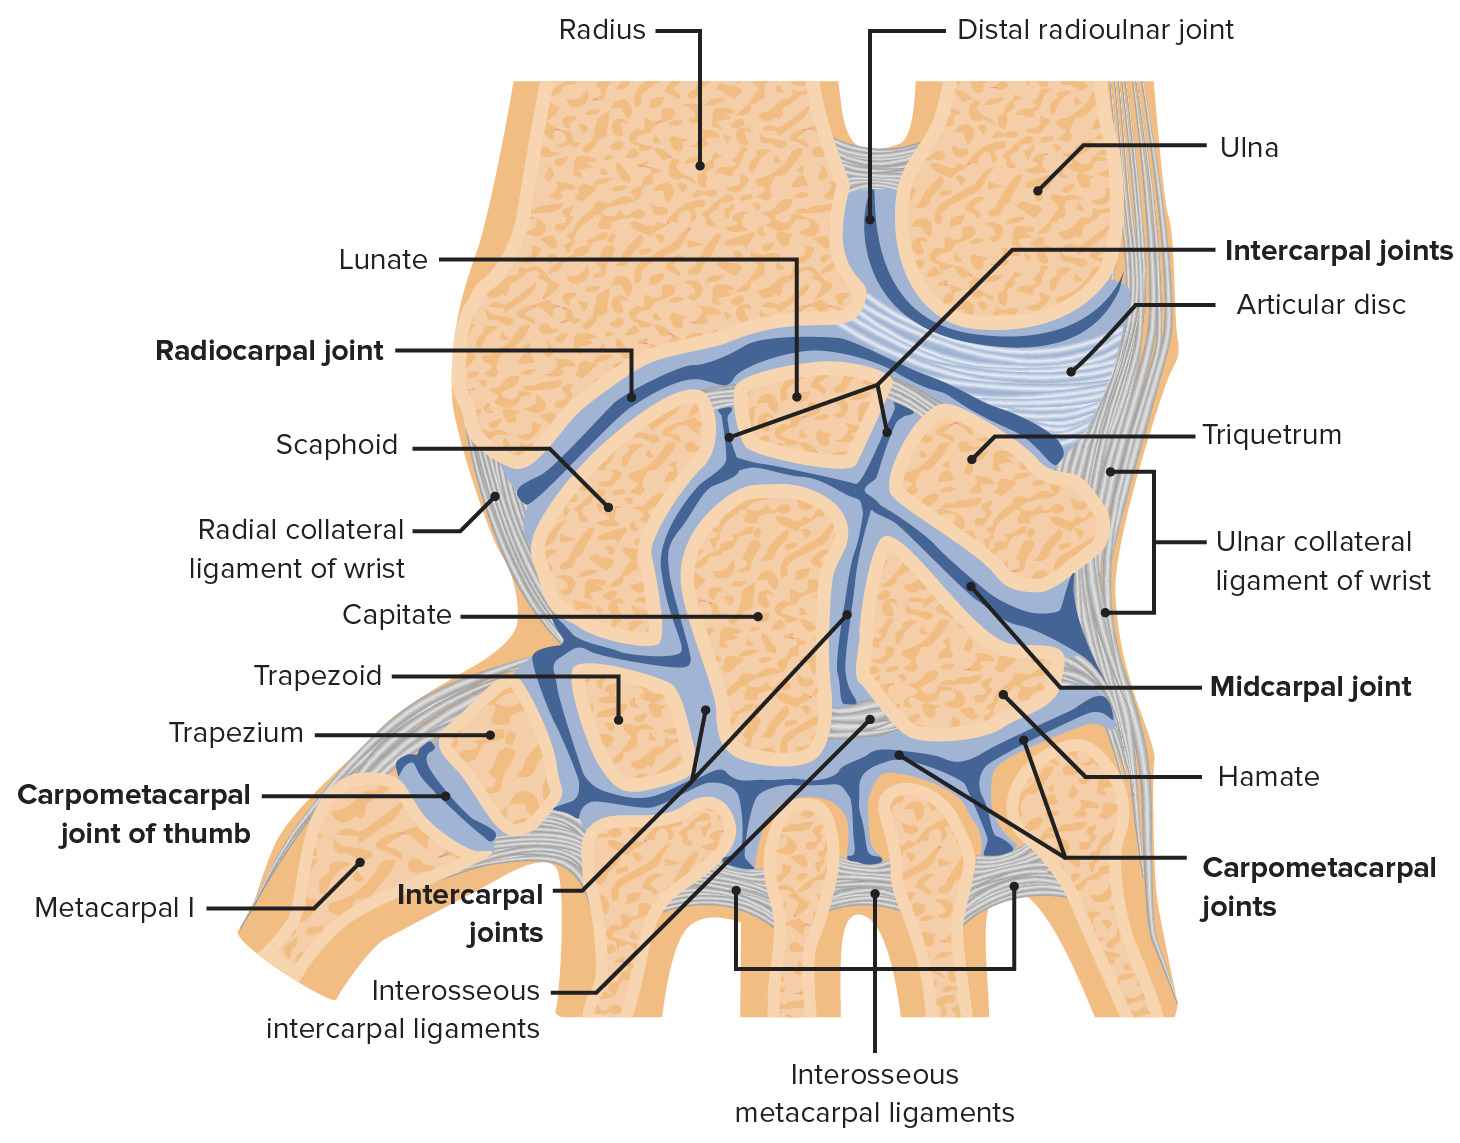 Coronal cross section of the right wrist